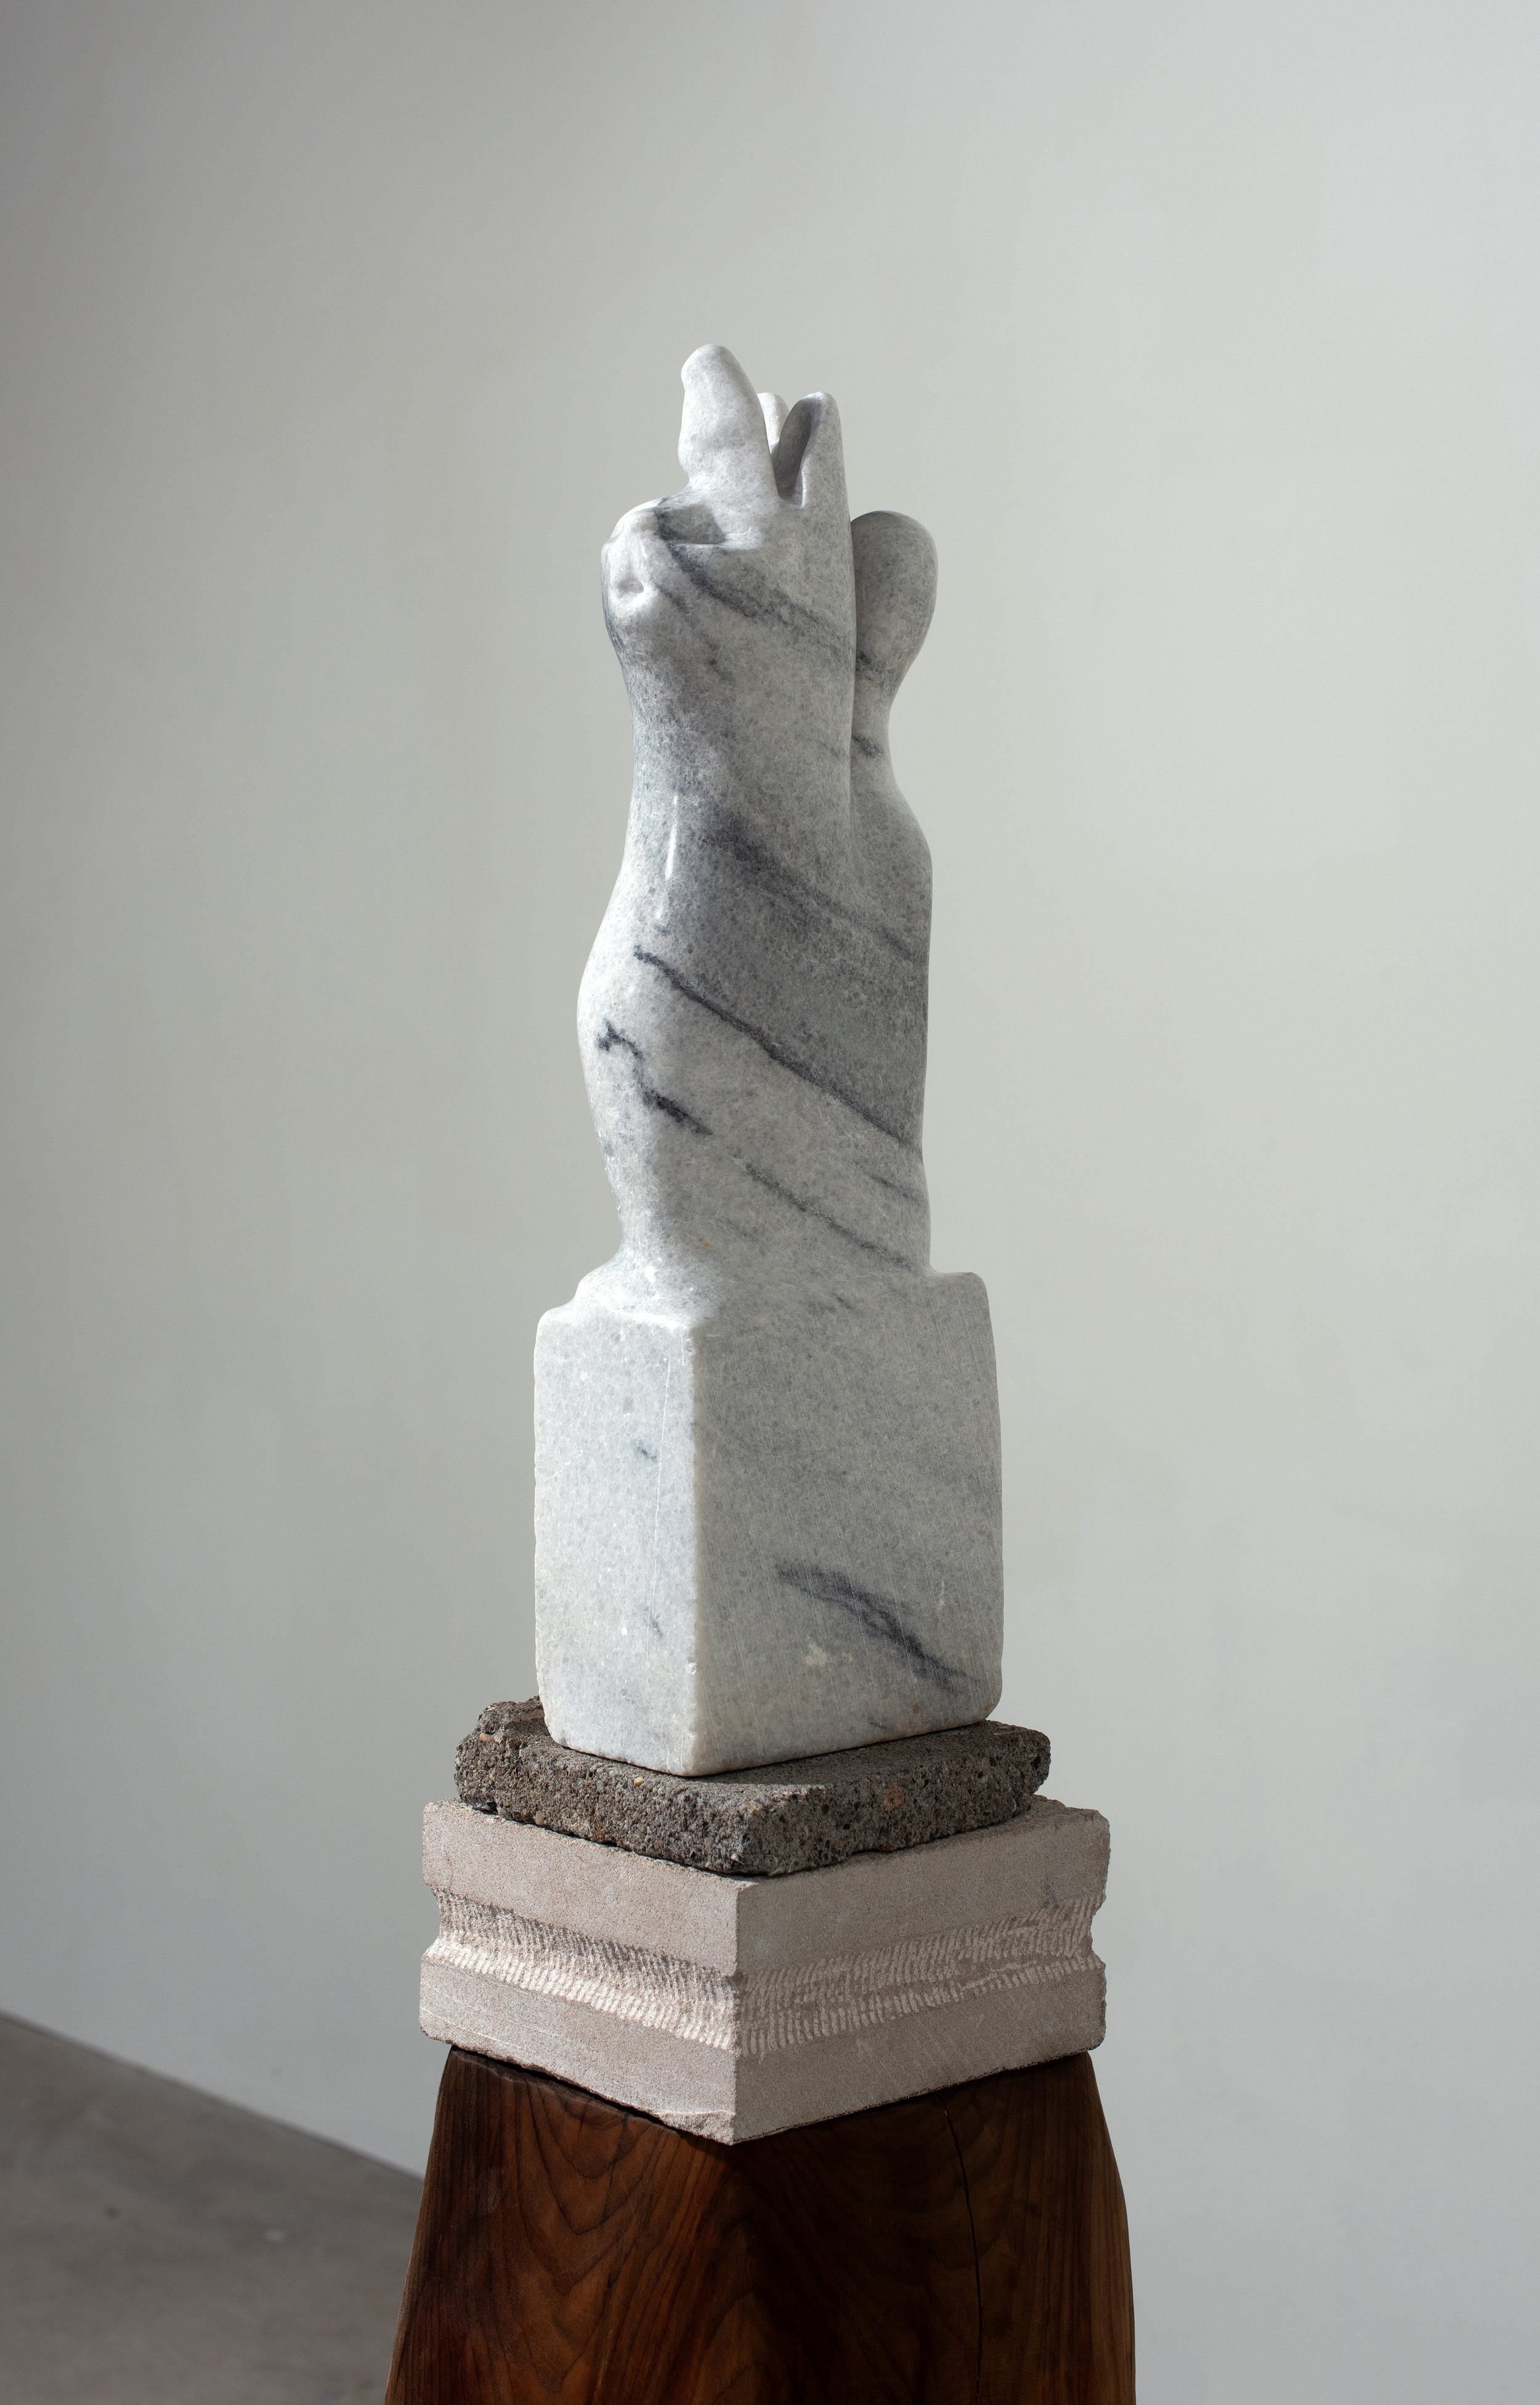   Singing Cat  (detail), 2020 Wood, marble, limestone, and concrete 63 1/2 x 10 x 10 inches&nbsp; 